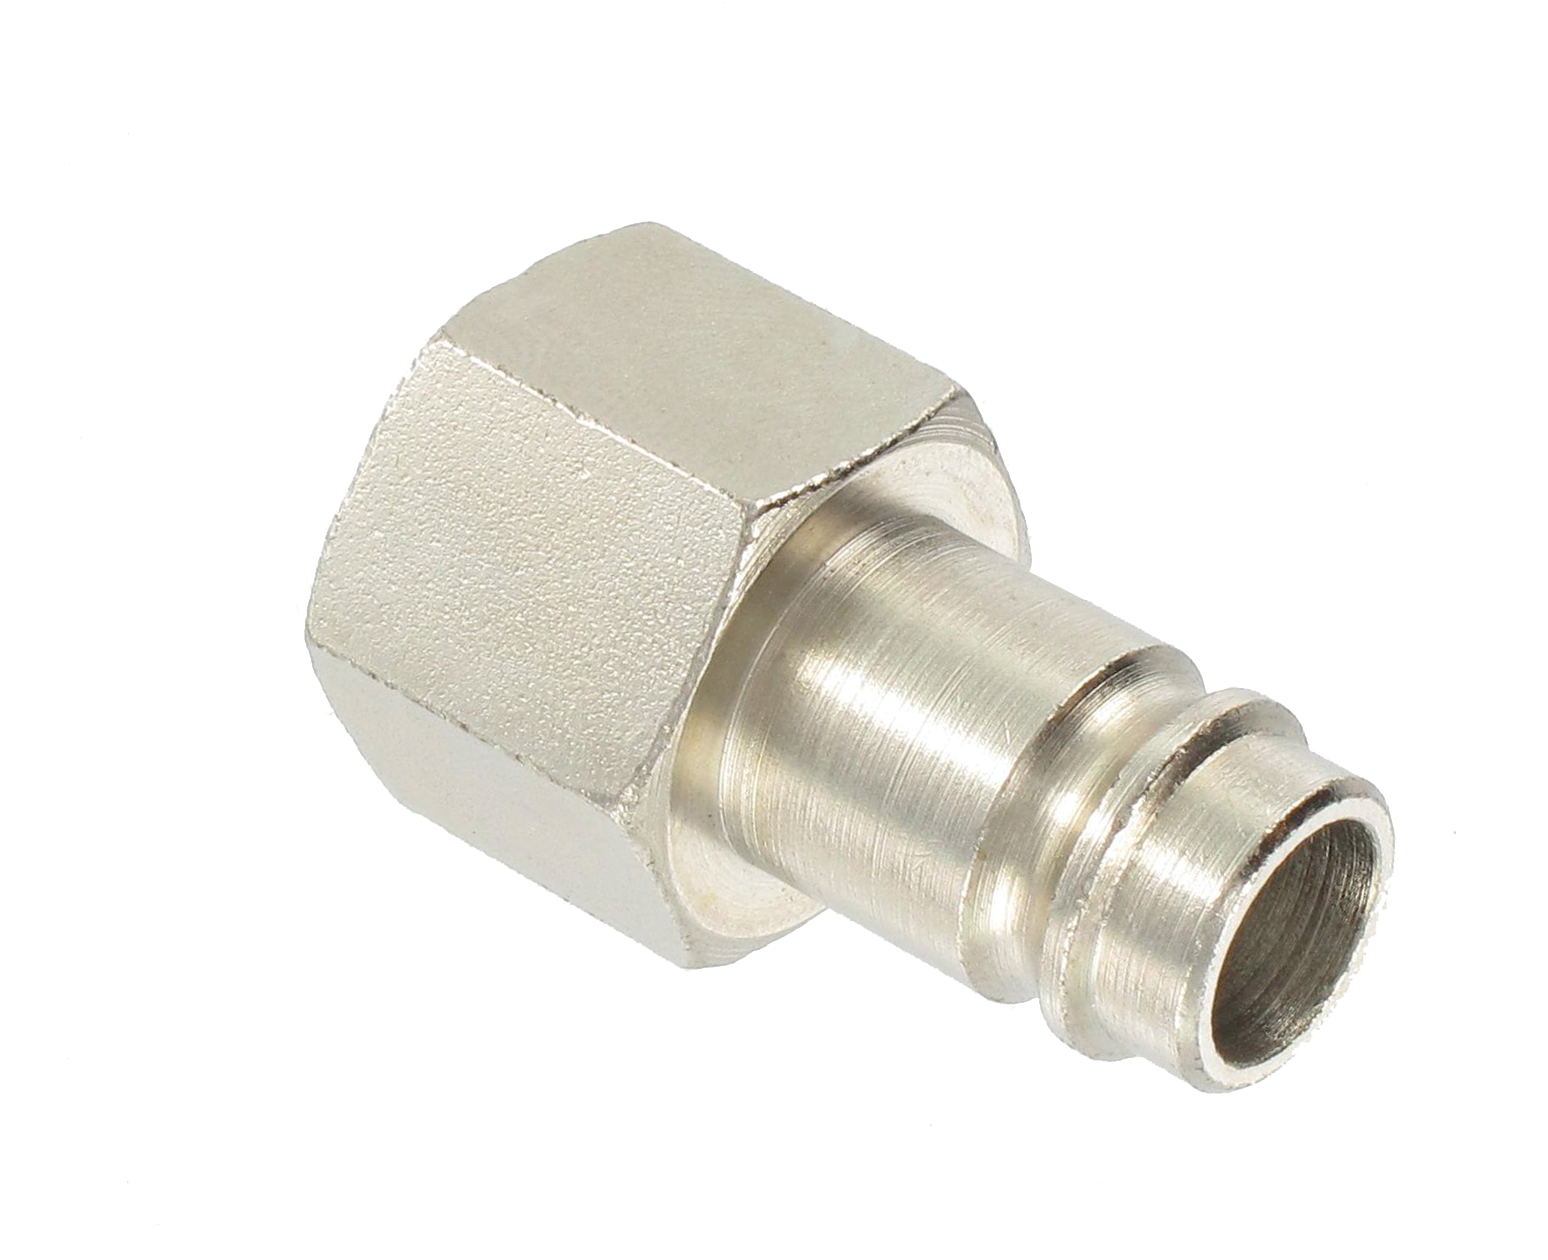 Plugs EURO profile female 10 mm passage Fittings and couplings